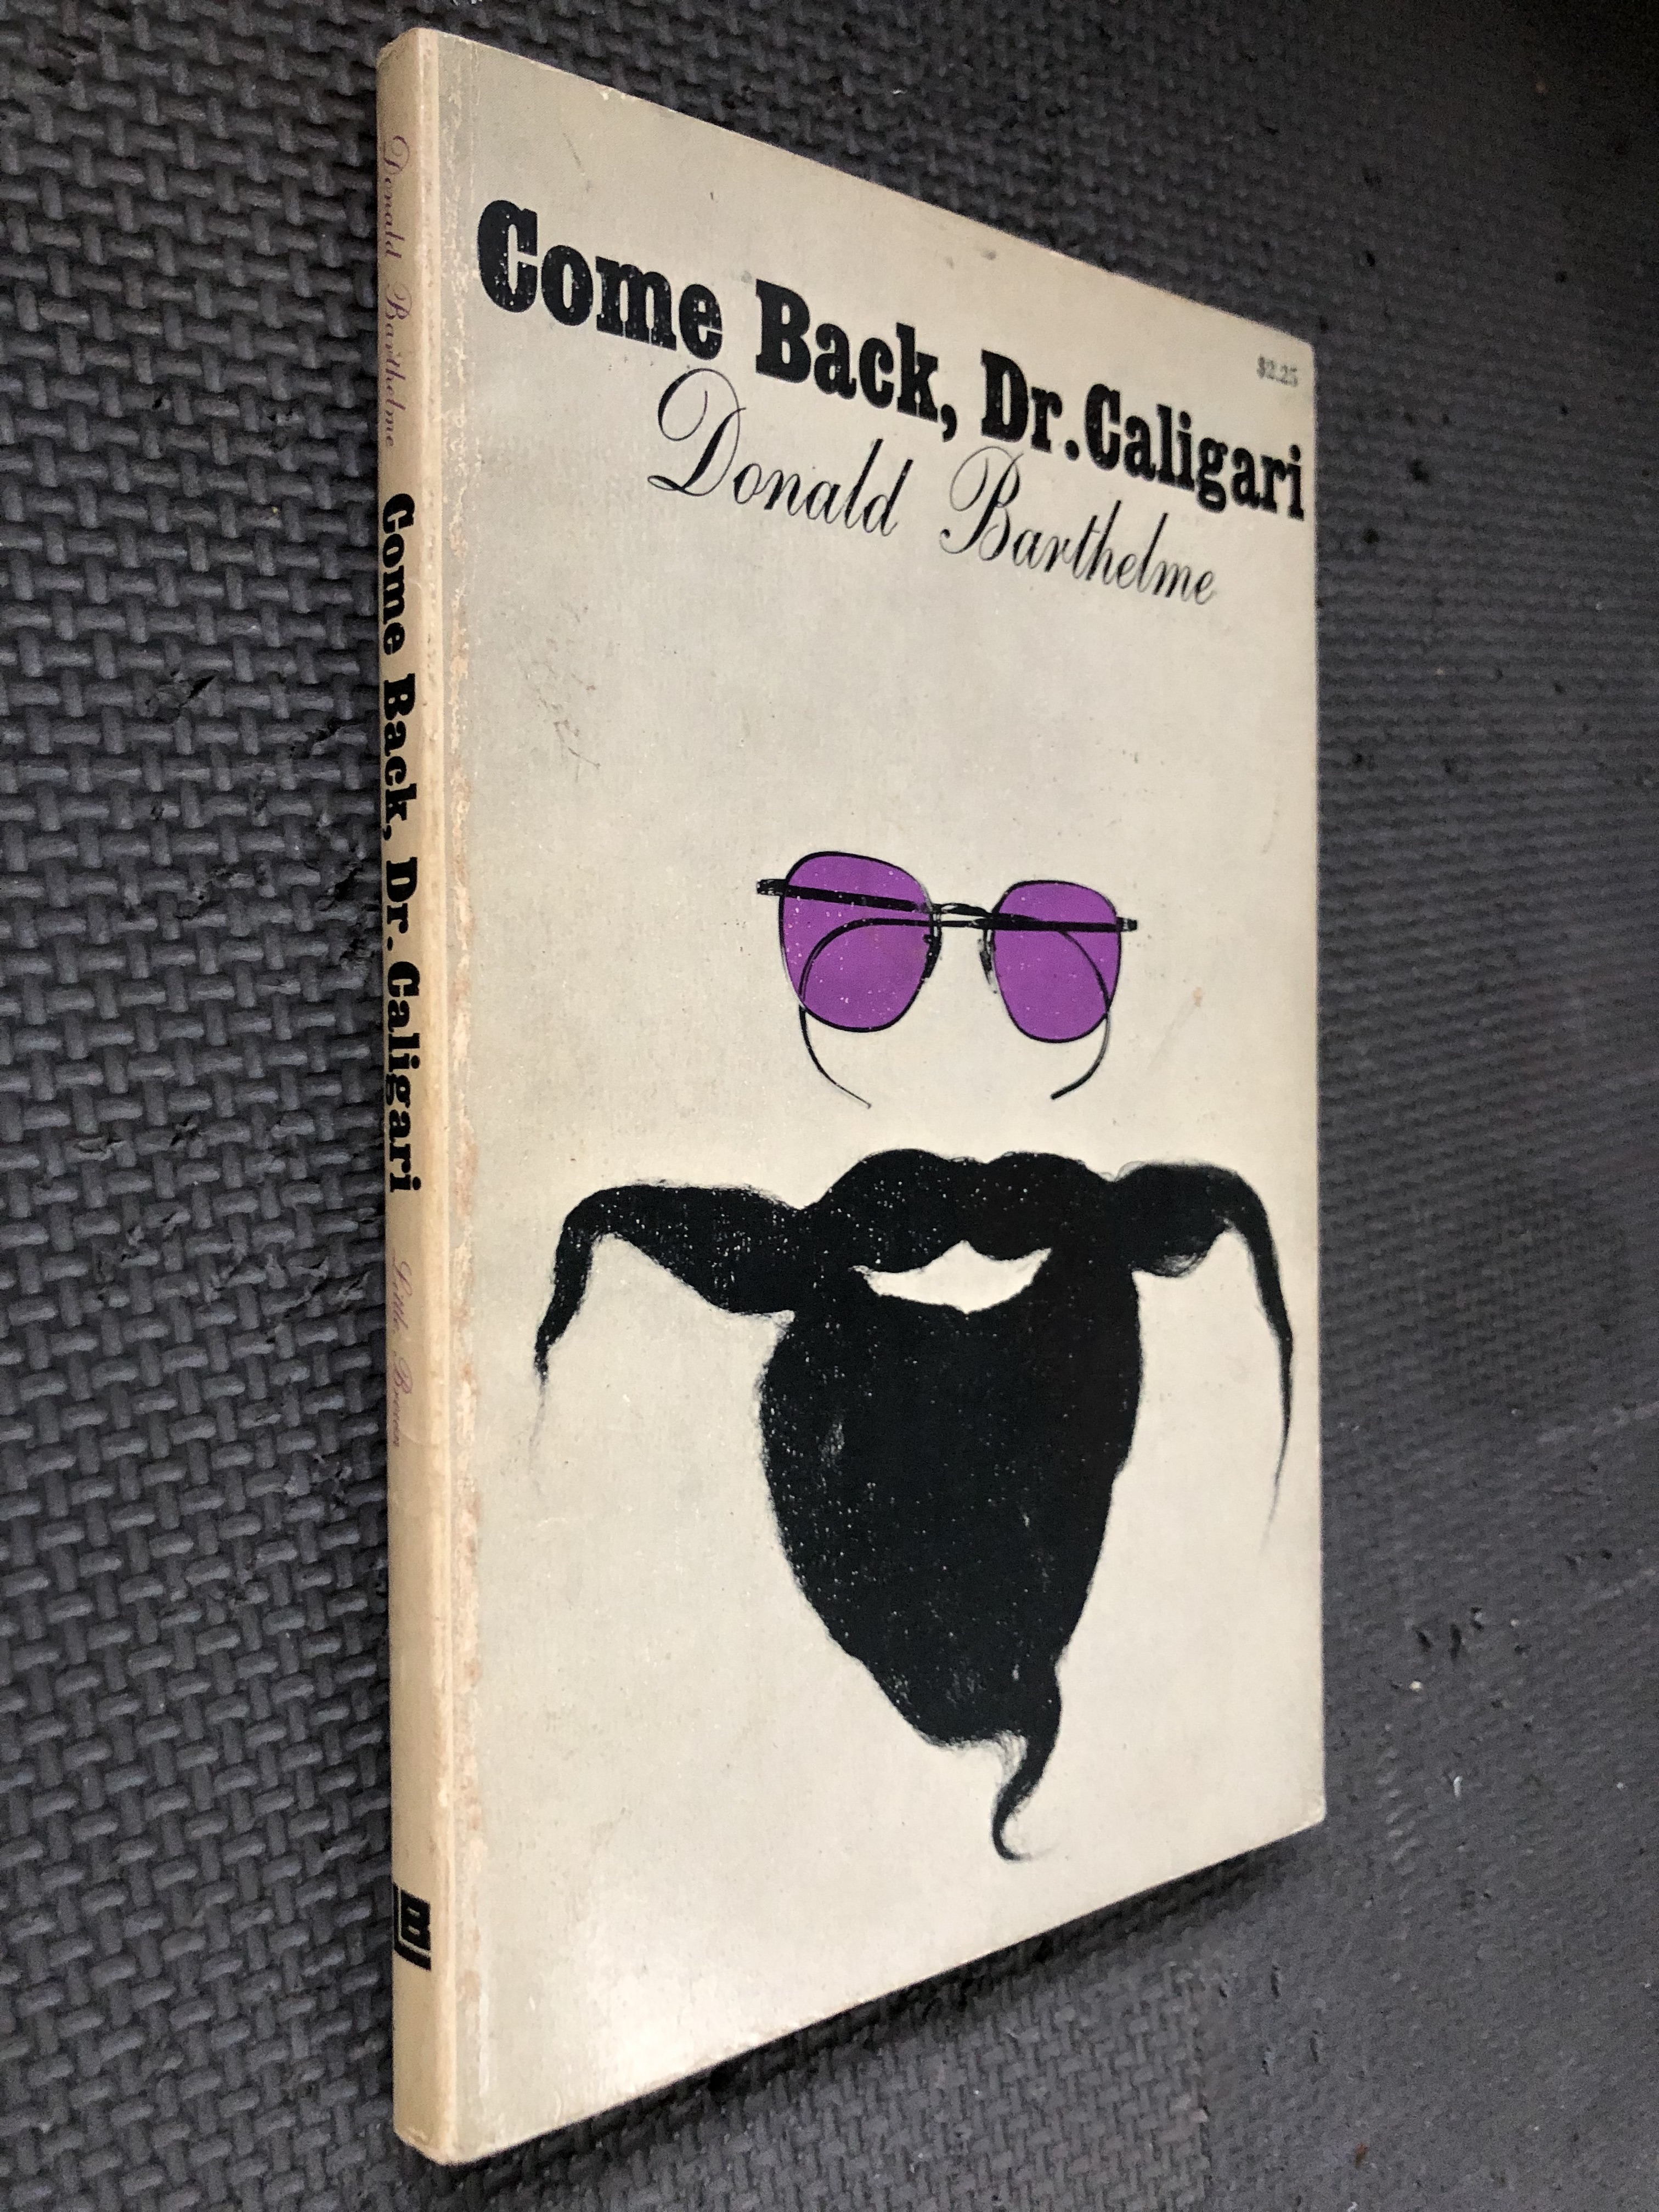 Come Back, Dr. Caligari by Donald Barthelme